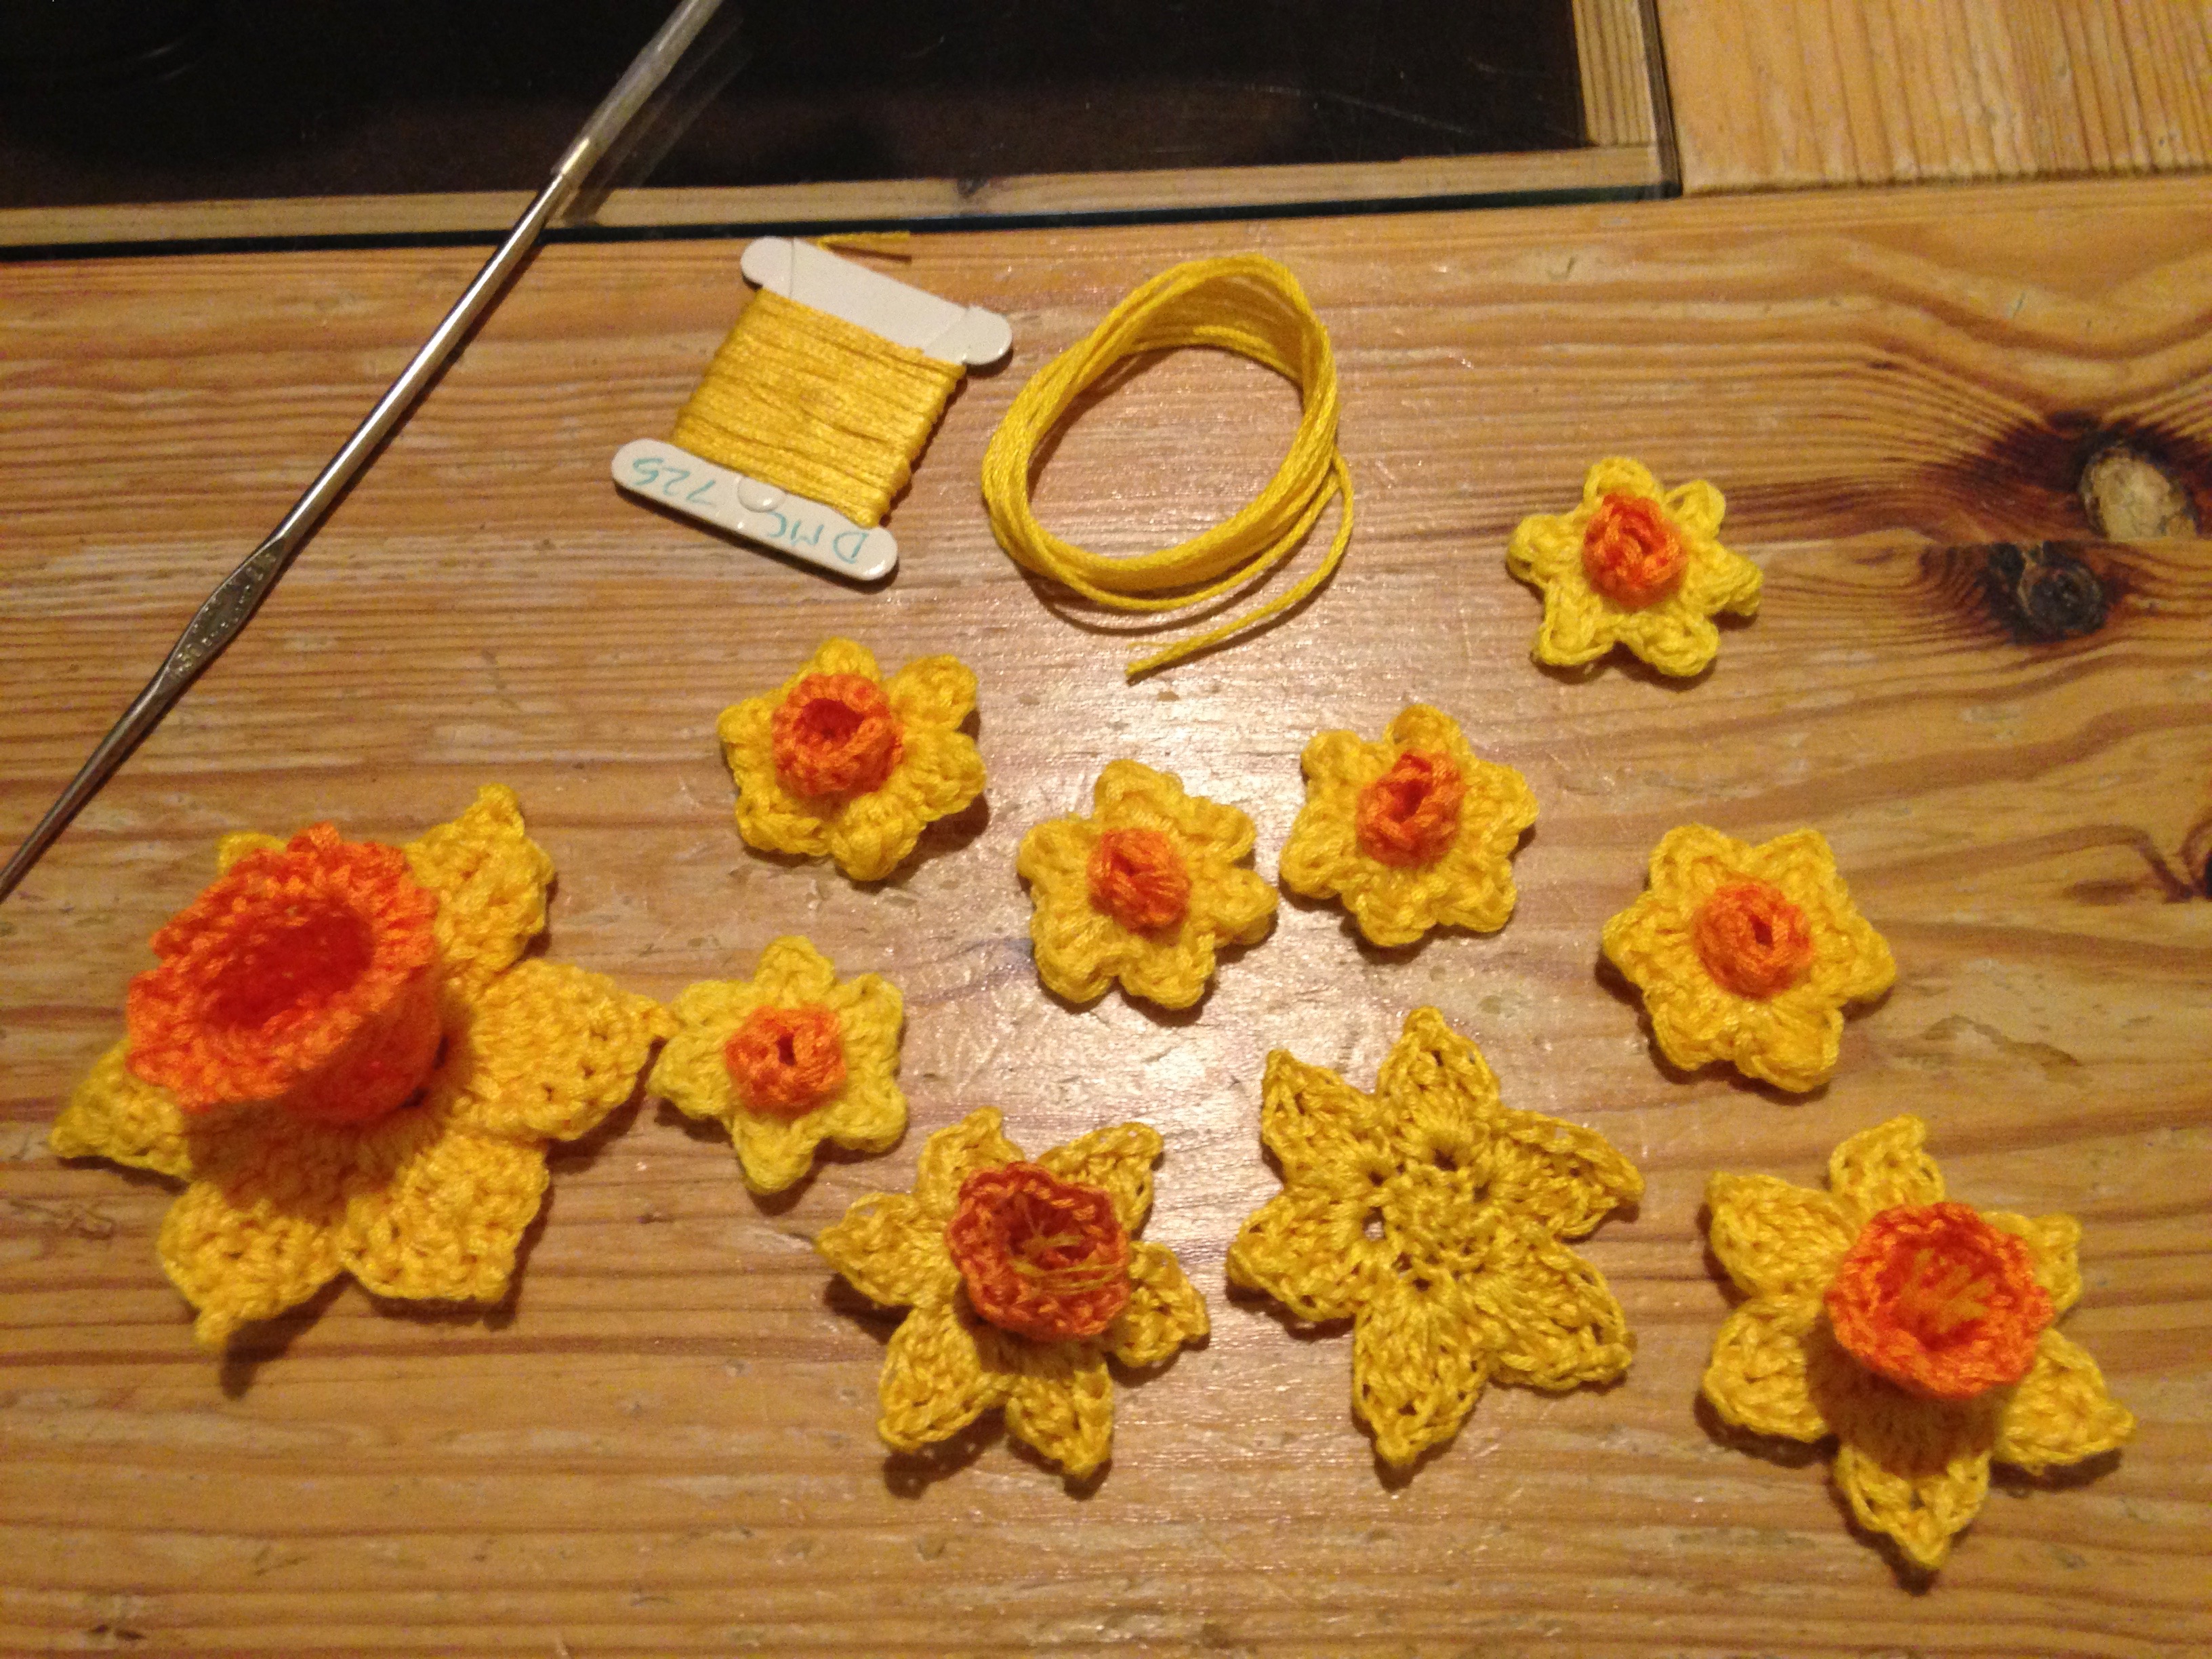 Developing Daffodil patterns, using a selection of different sizes, using different yarns and shades.